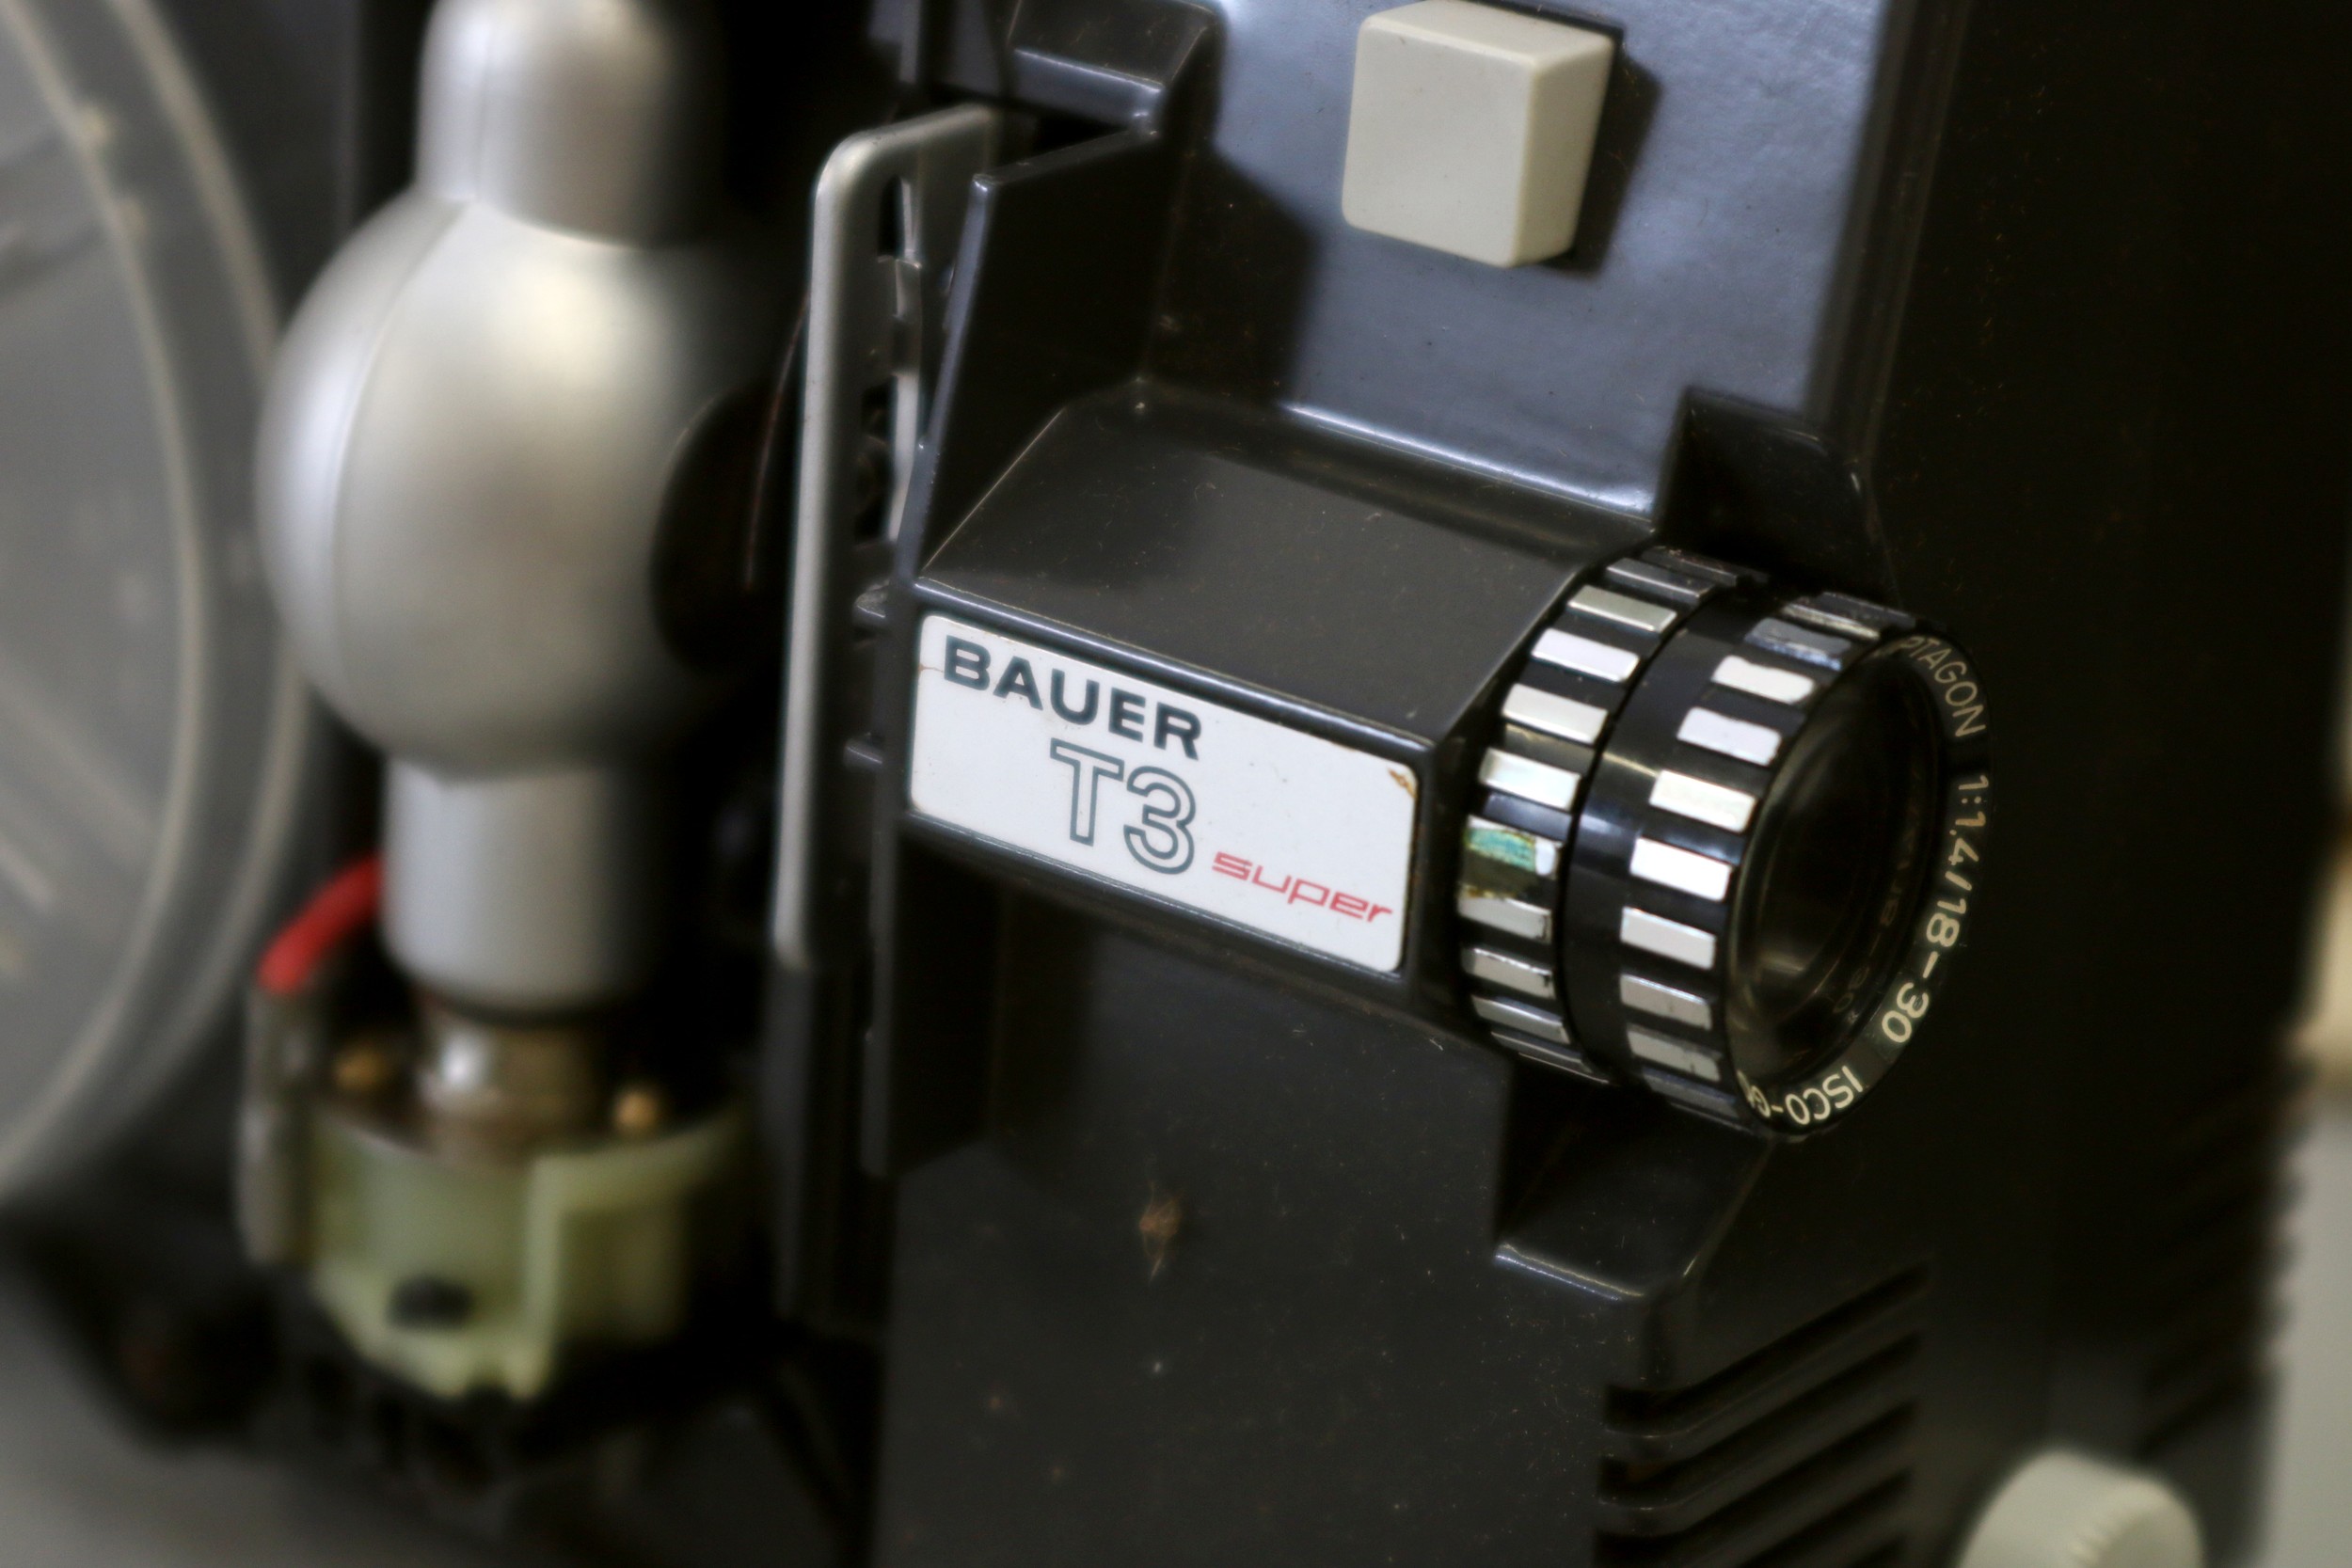 Three 8mm movie projectors, including a Bauer Super T3, with a fitted interior box and - Image 3 of 7